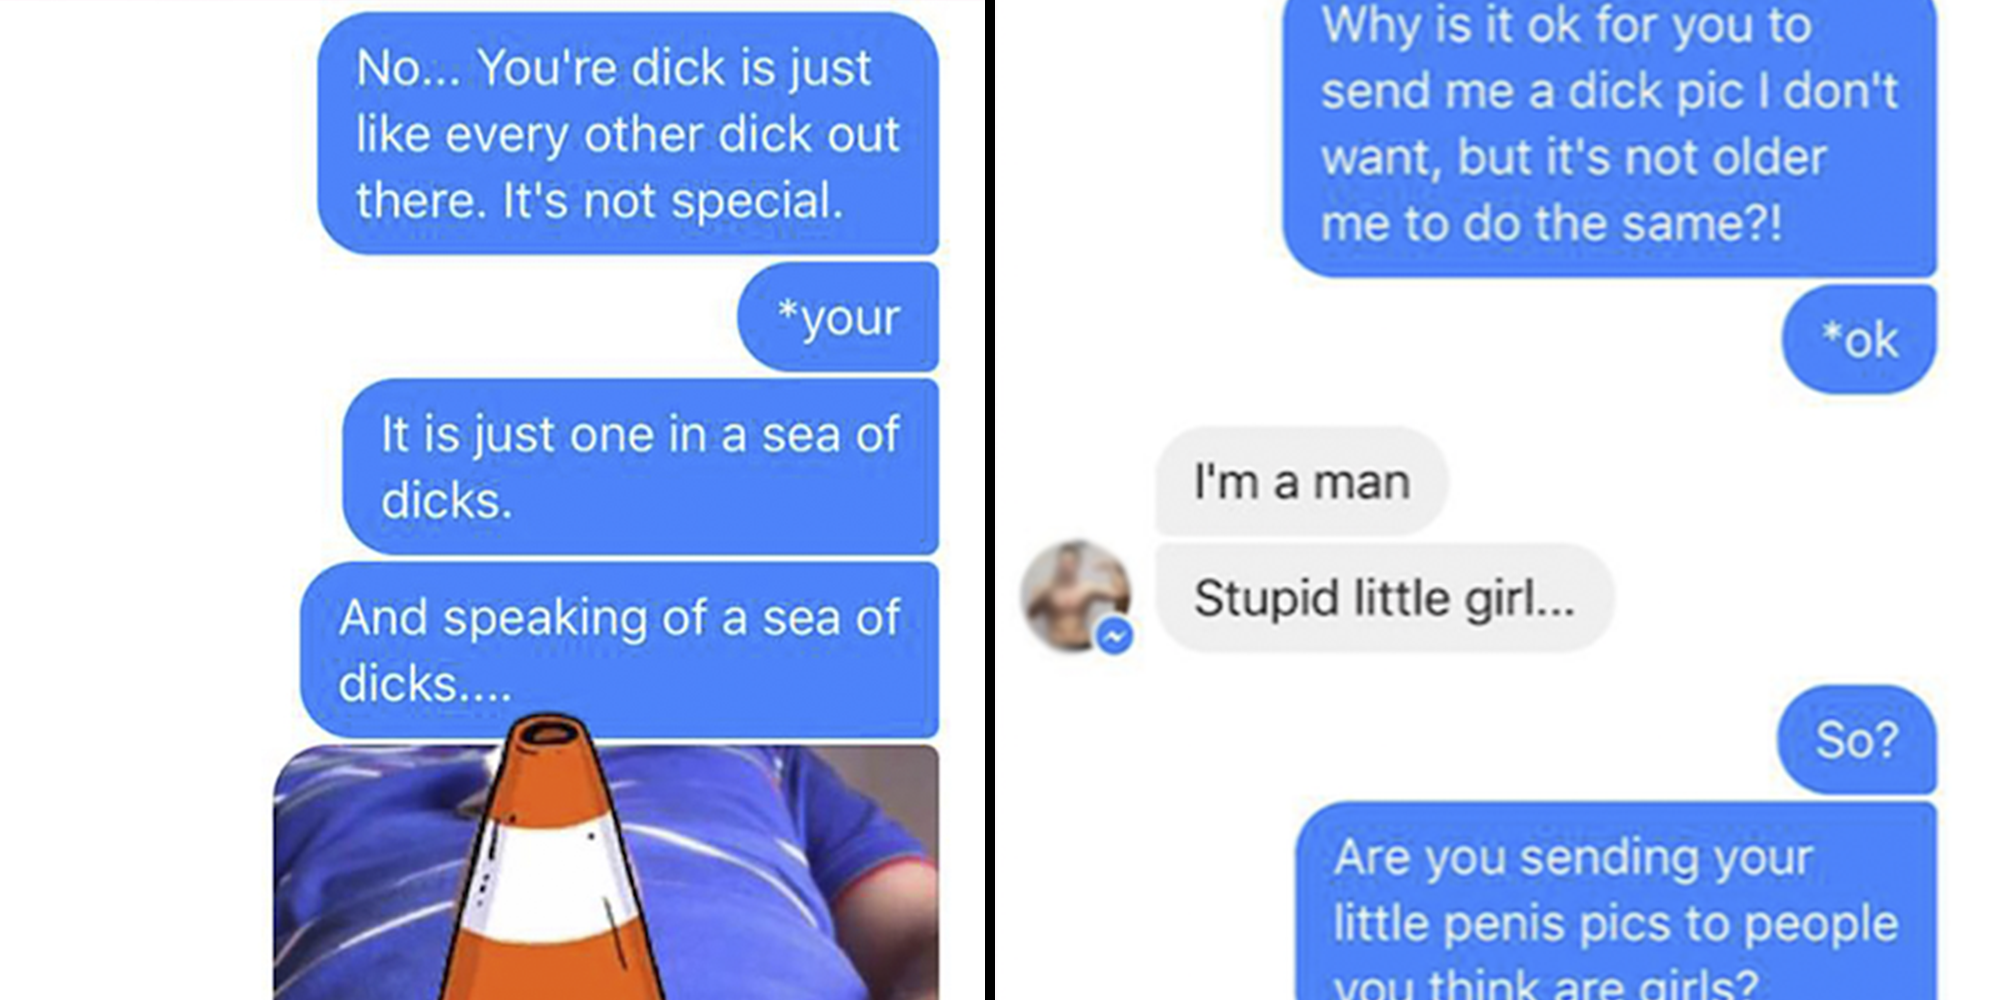 I sent a dick pic to my gay friend